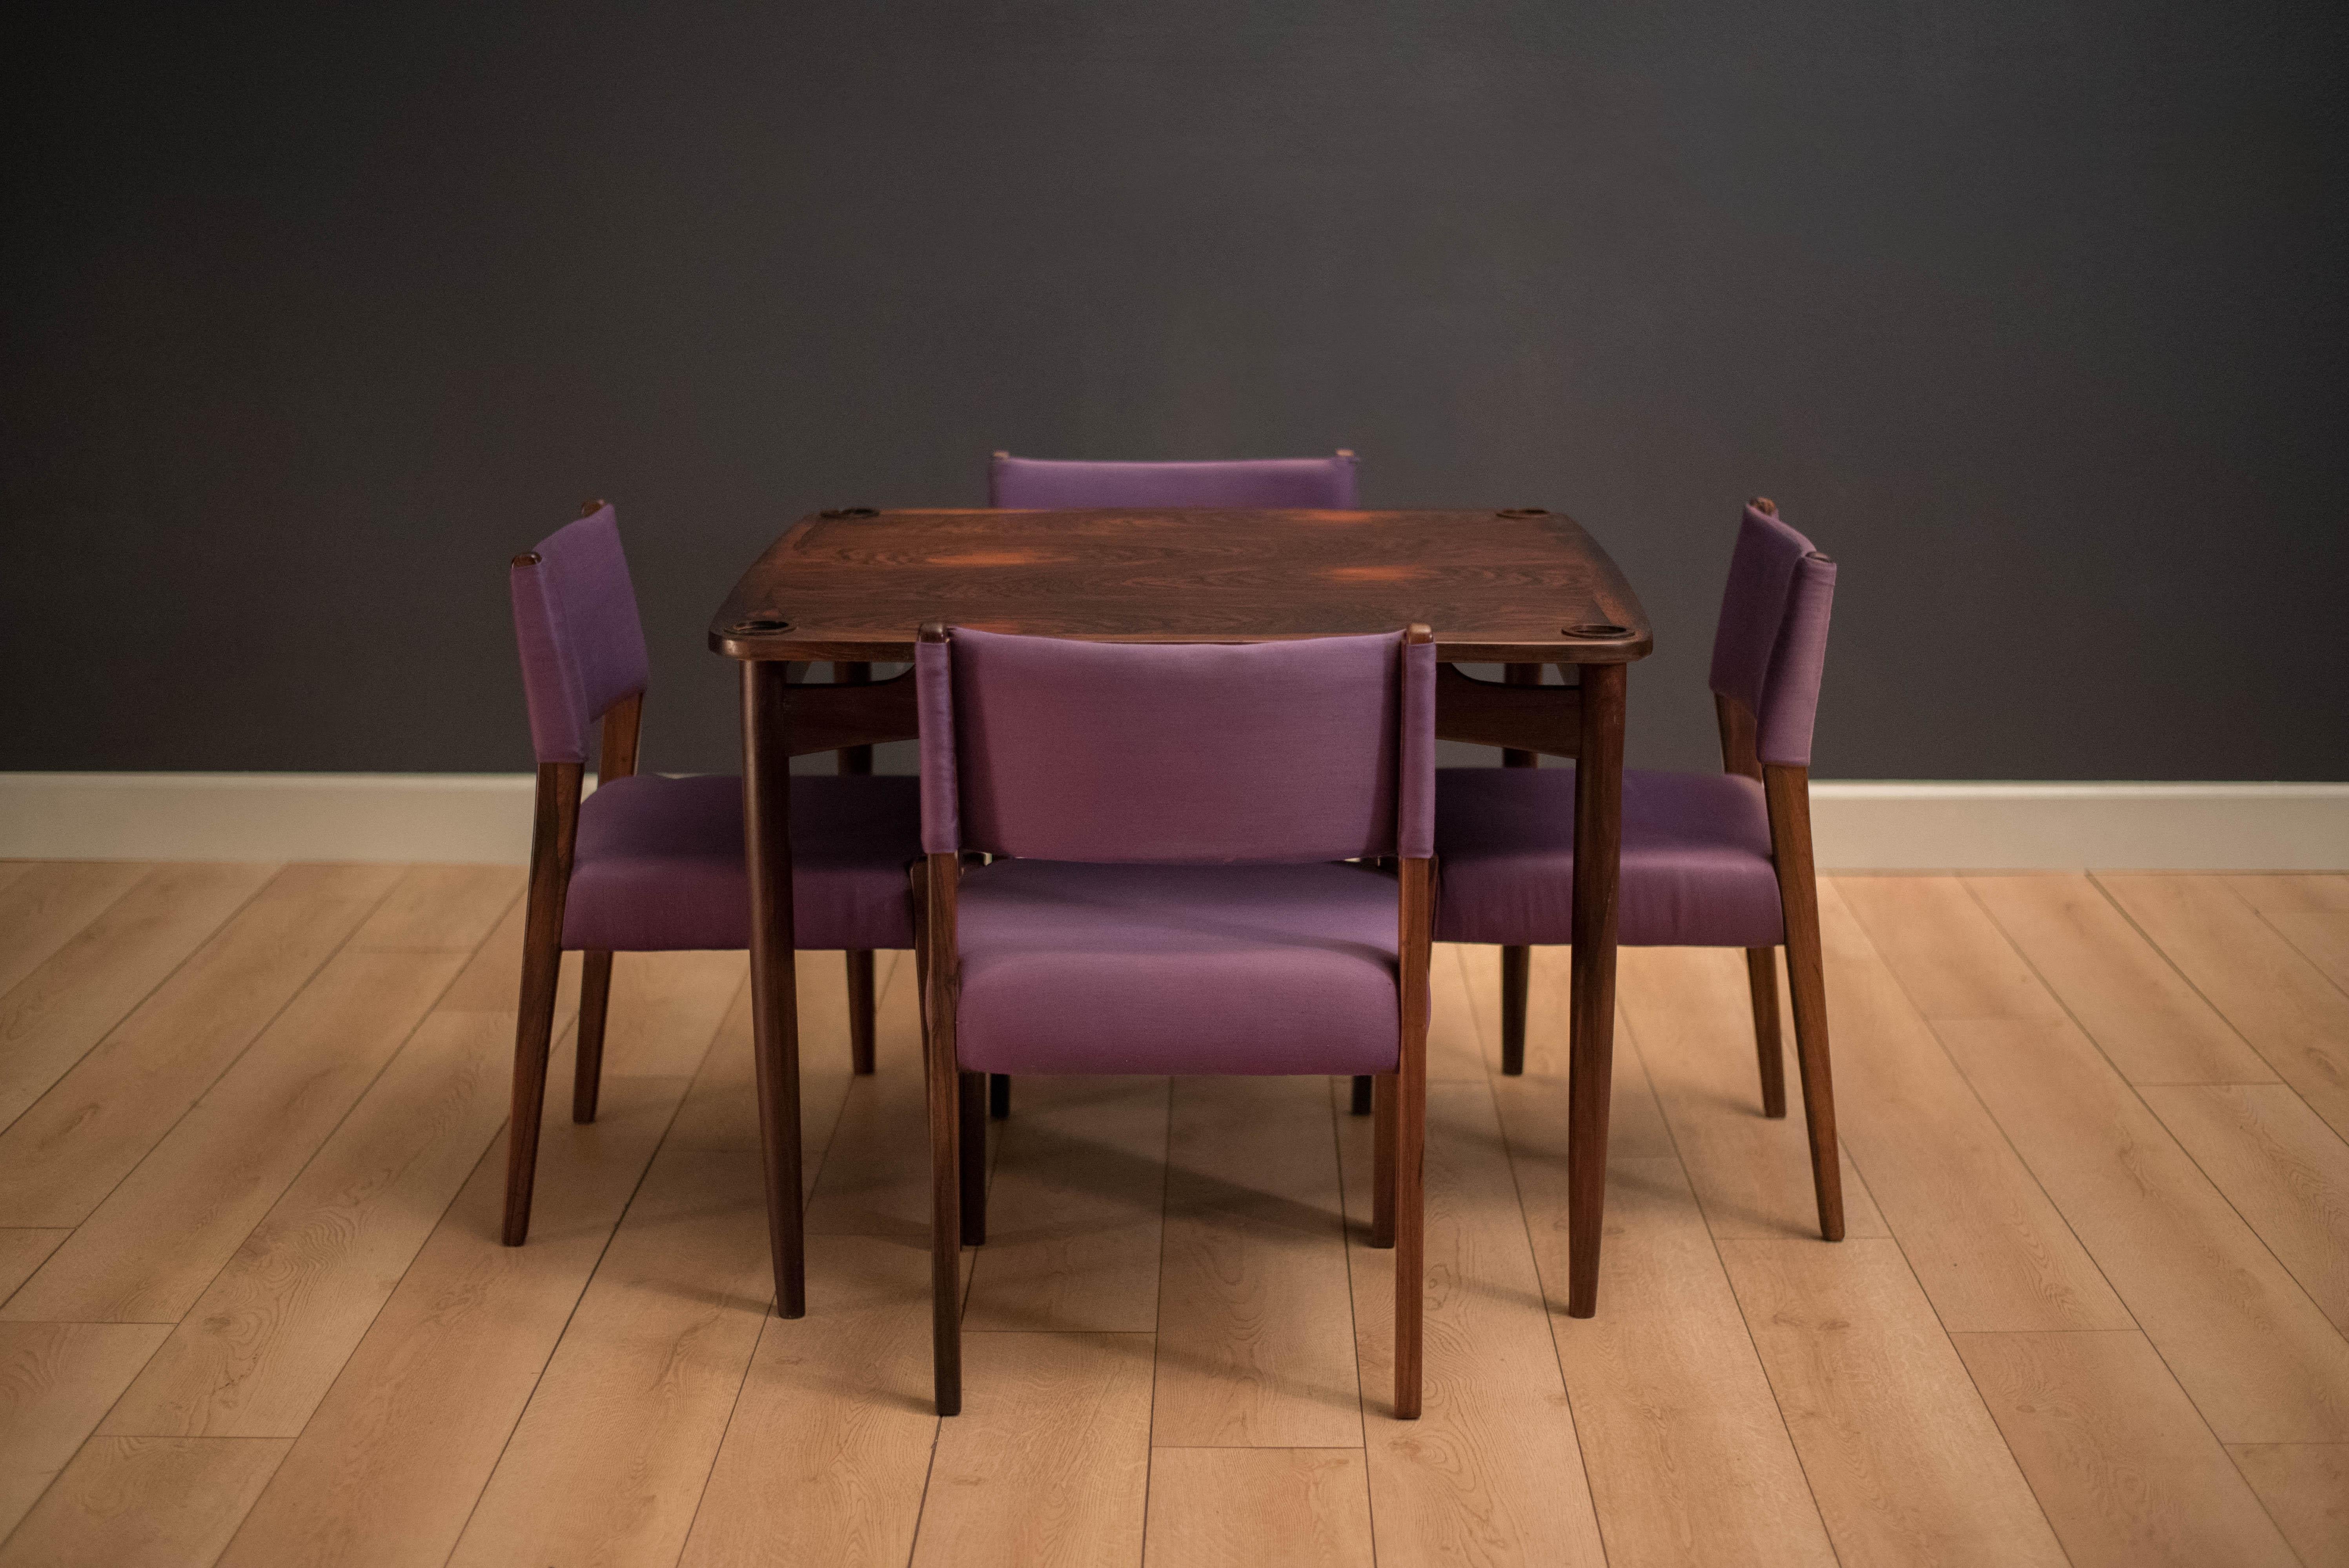 Mid-Century Modern dining chairs in rosewood designed by Sergio Rodrigues for Oca, Brazil. This set includes four chairs with the original fabric. Upholstery can be customized to your choice of fabric at an additional cost. Inquire for more details.